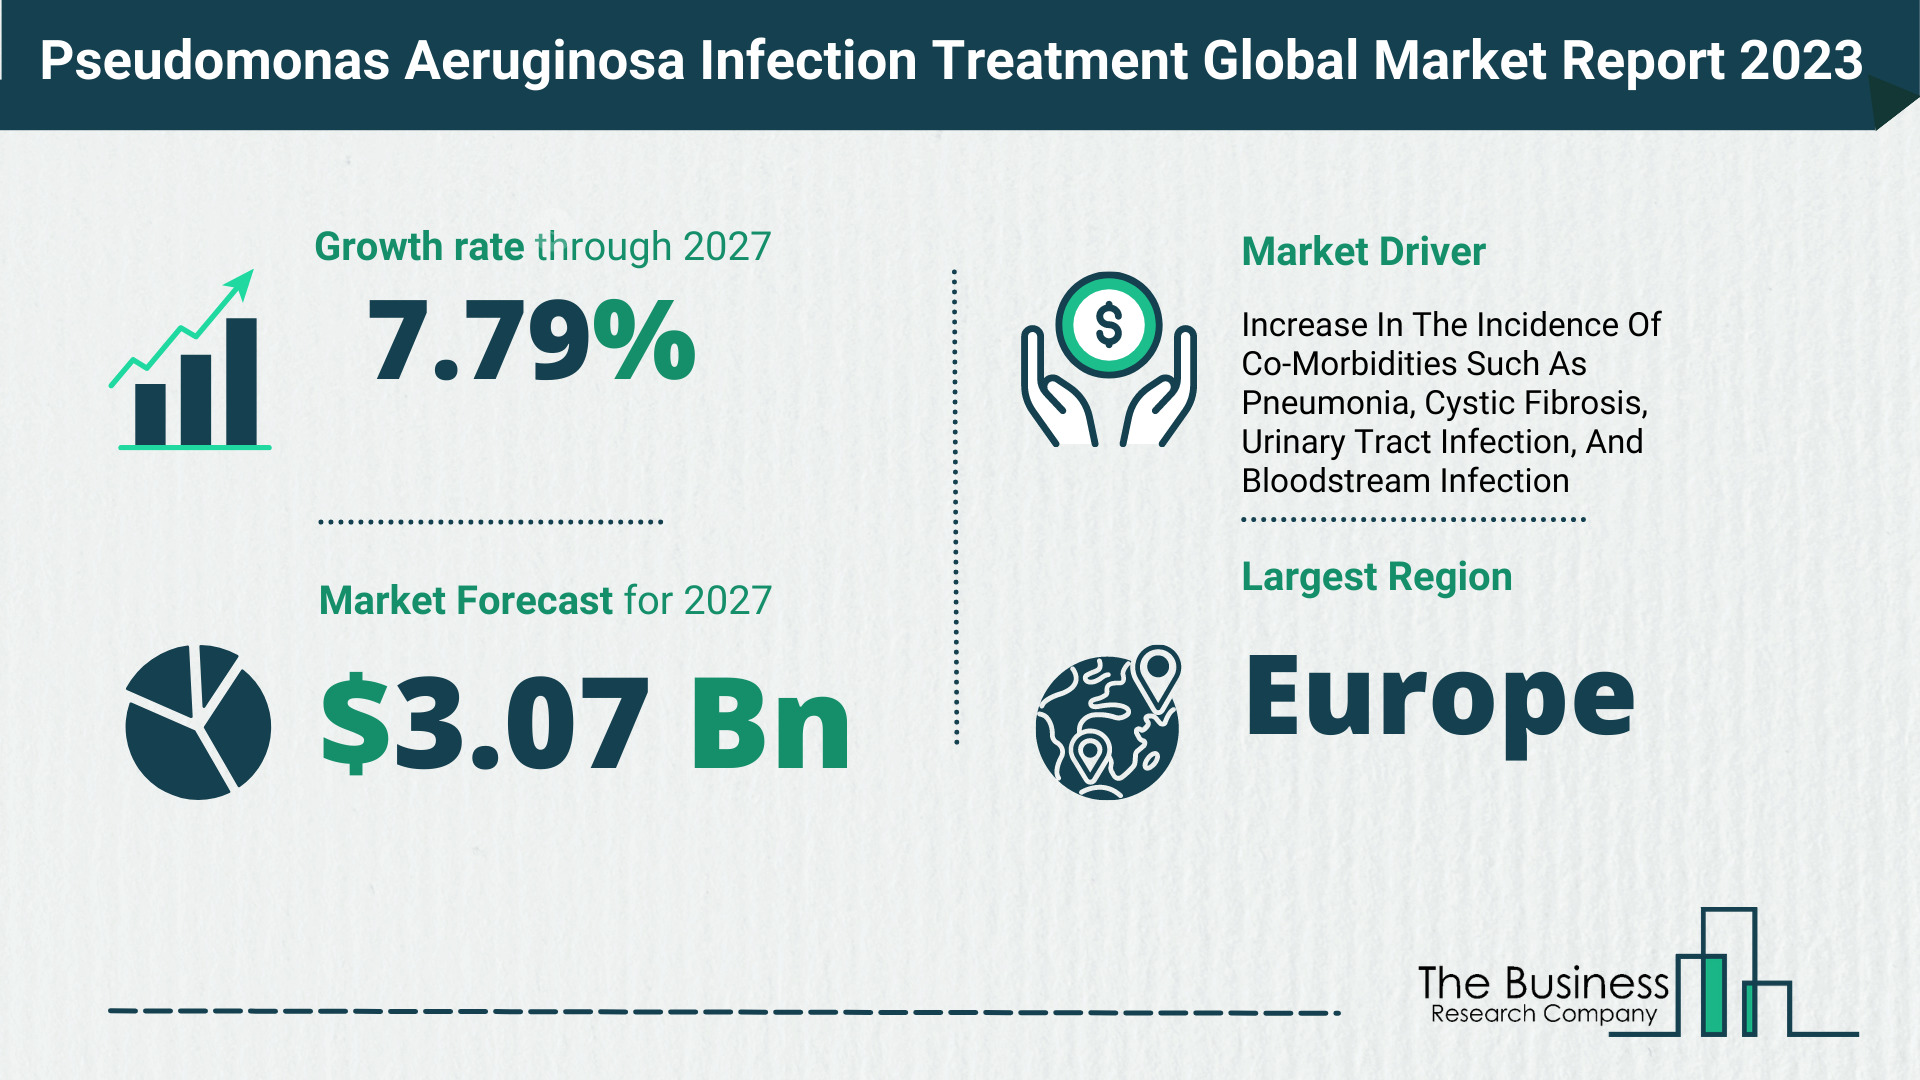 Pseudomonas Aeruginosa Infection Treatment Market Forecast 2023-2027 By The Business Research Company